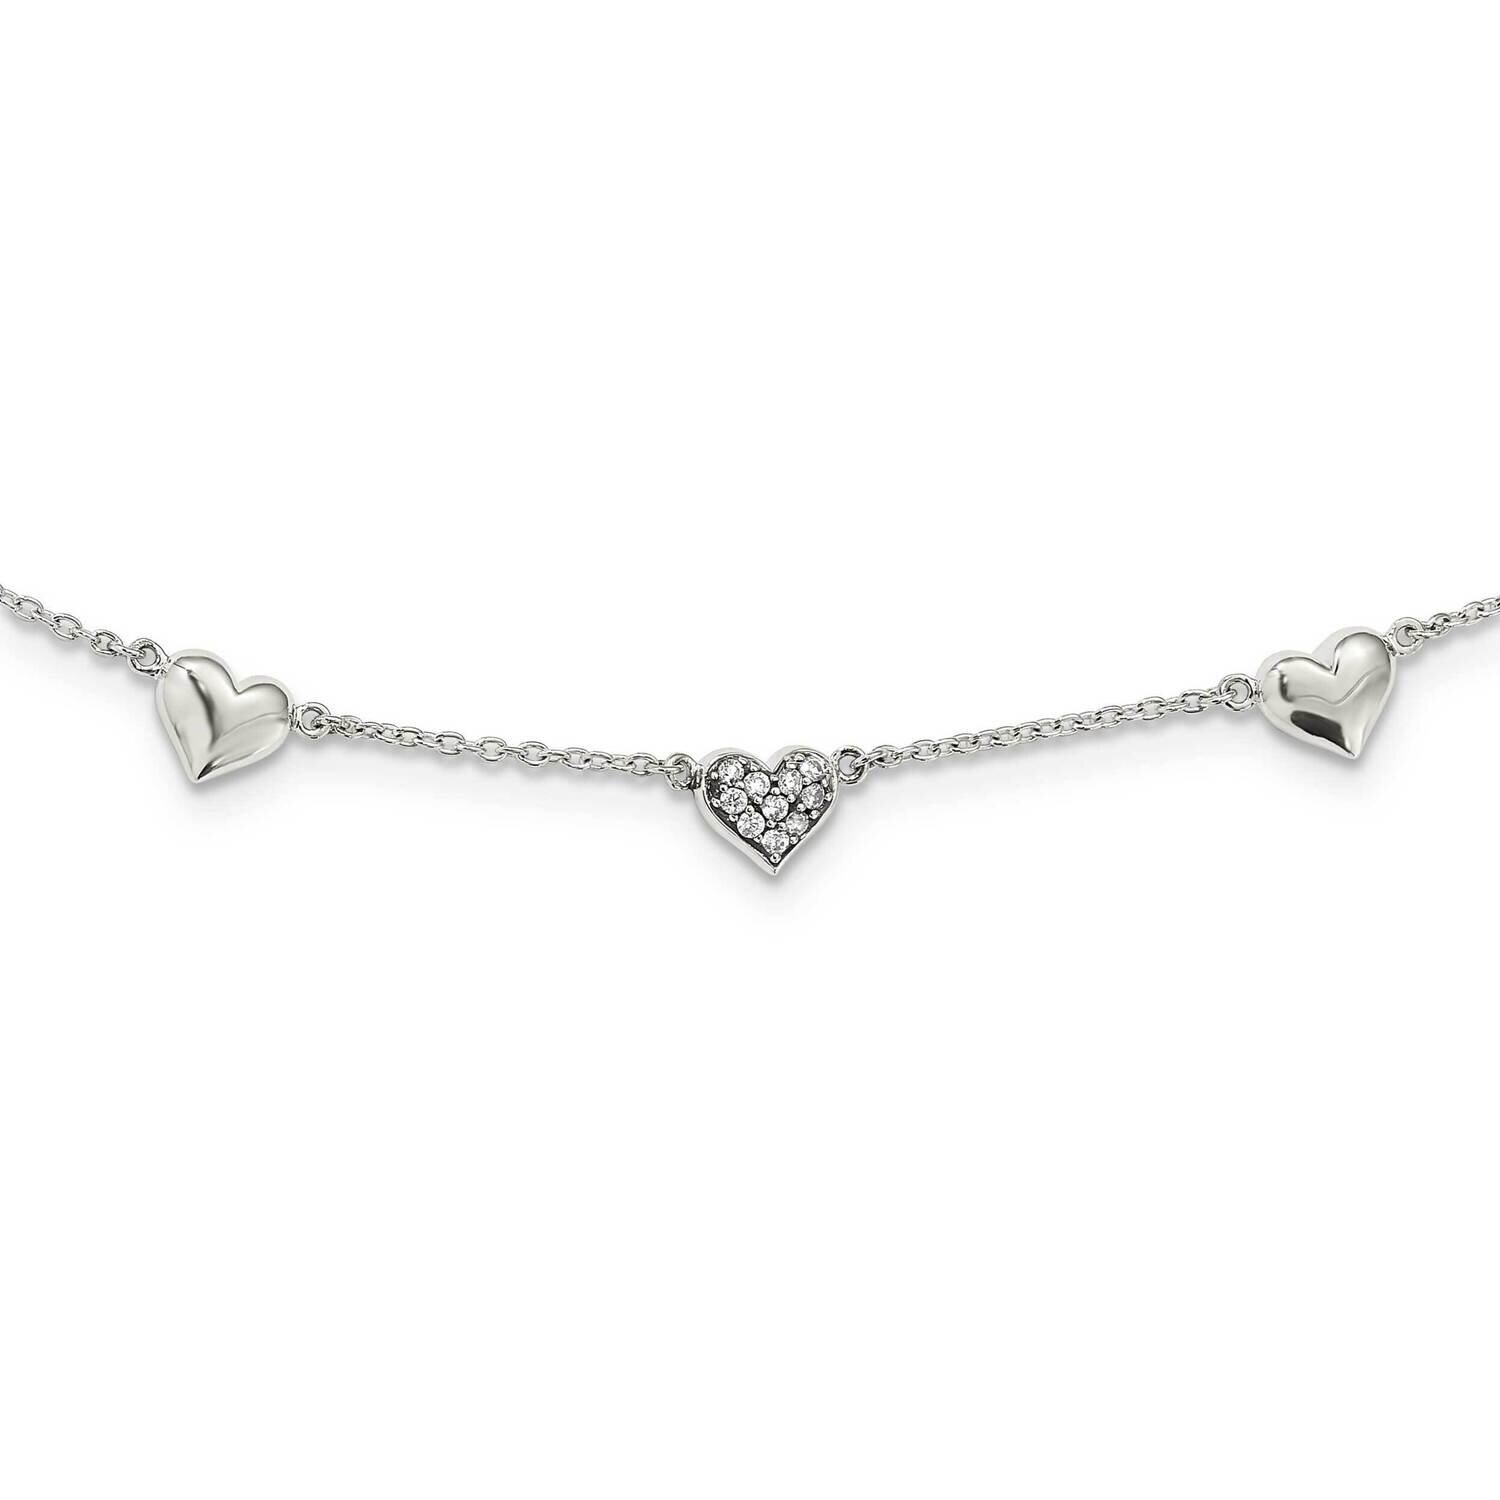 CZ Diamond Heart 17.5 Inch with 2 Inch Extender Necklace 17.5 Inch Sterling Silver Antiqued QG6027-17.5